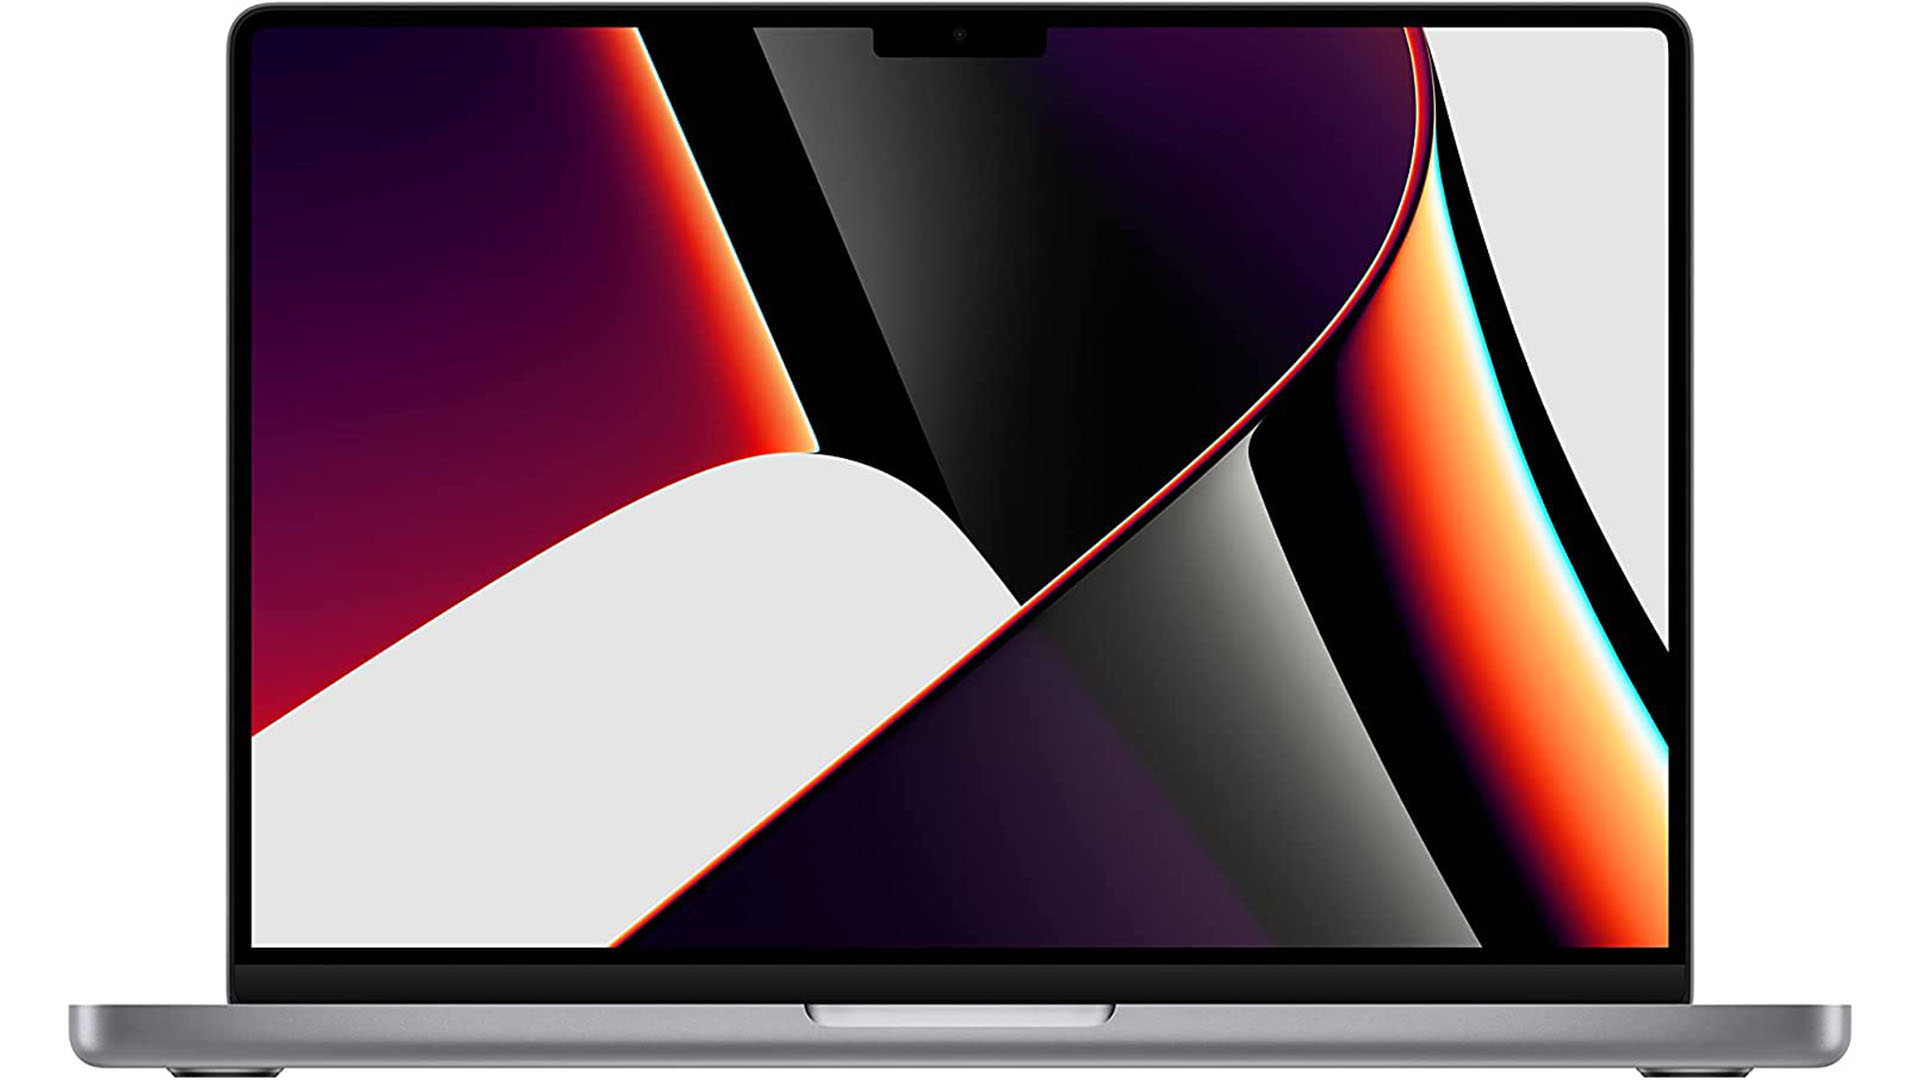 Save $400 on the latest and greatest MacBook Pro M1 in Best Buy's 2023 New Year sale - one of the best laptops for students and coding